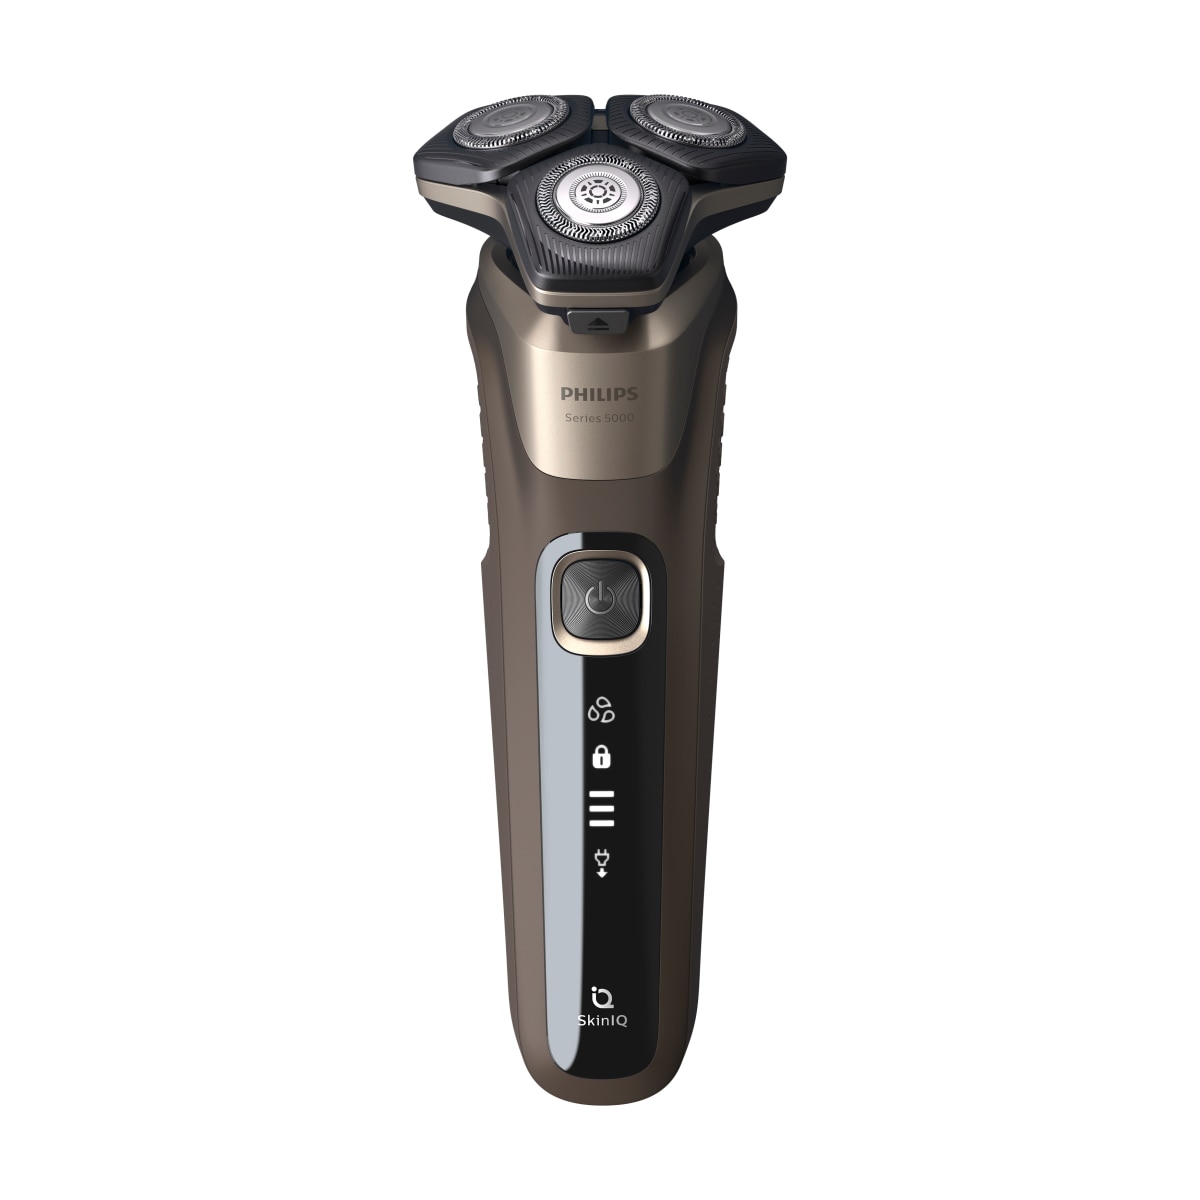 Philips Shaver Series 6000, S6680/26